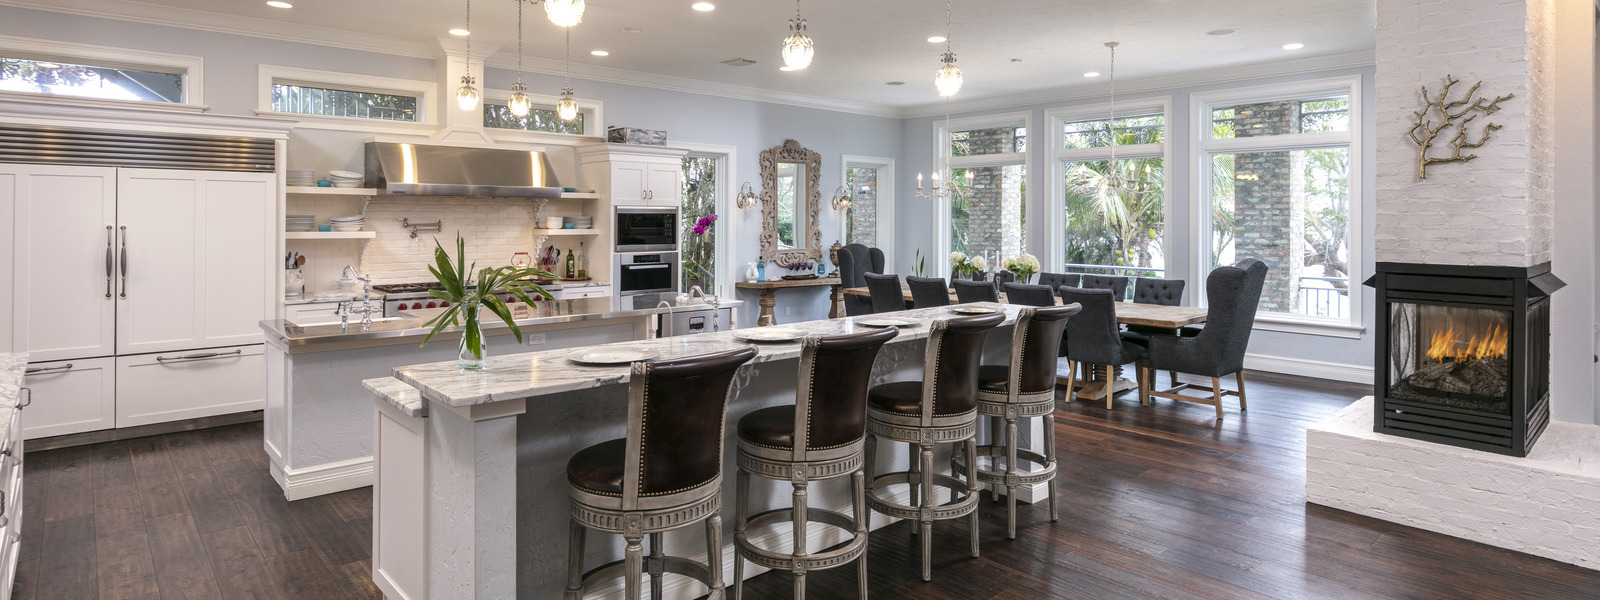 stunning two island kitchen with dining table in background